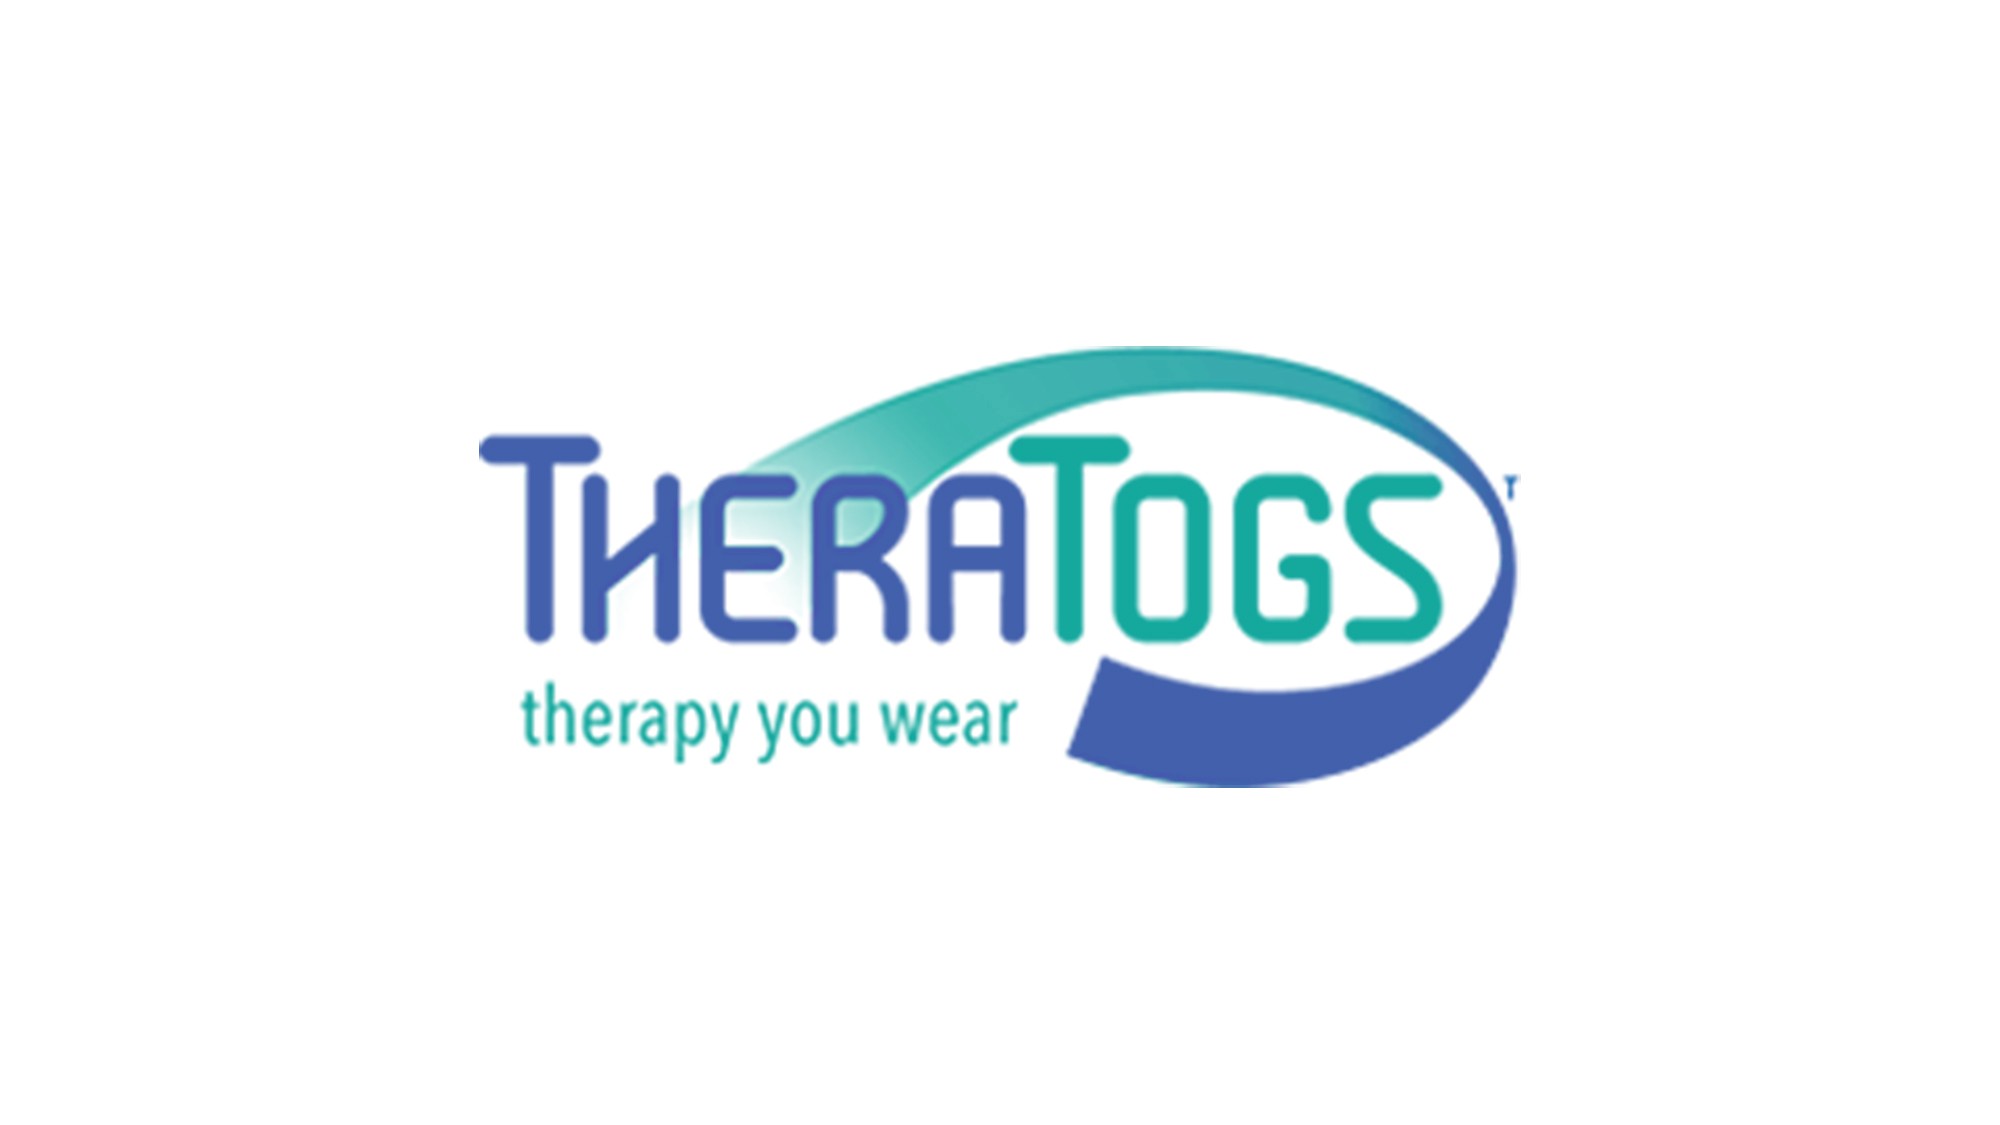 TheraTogs